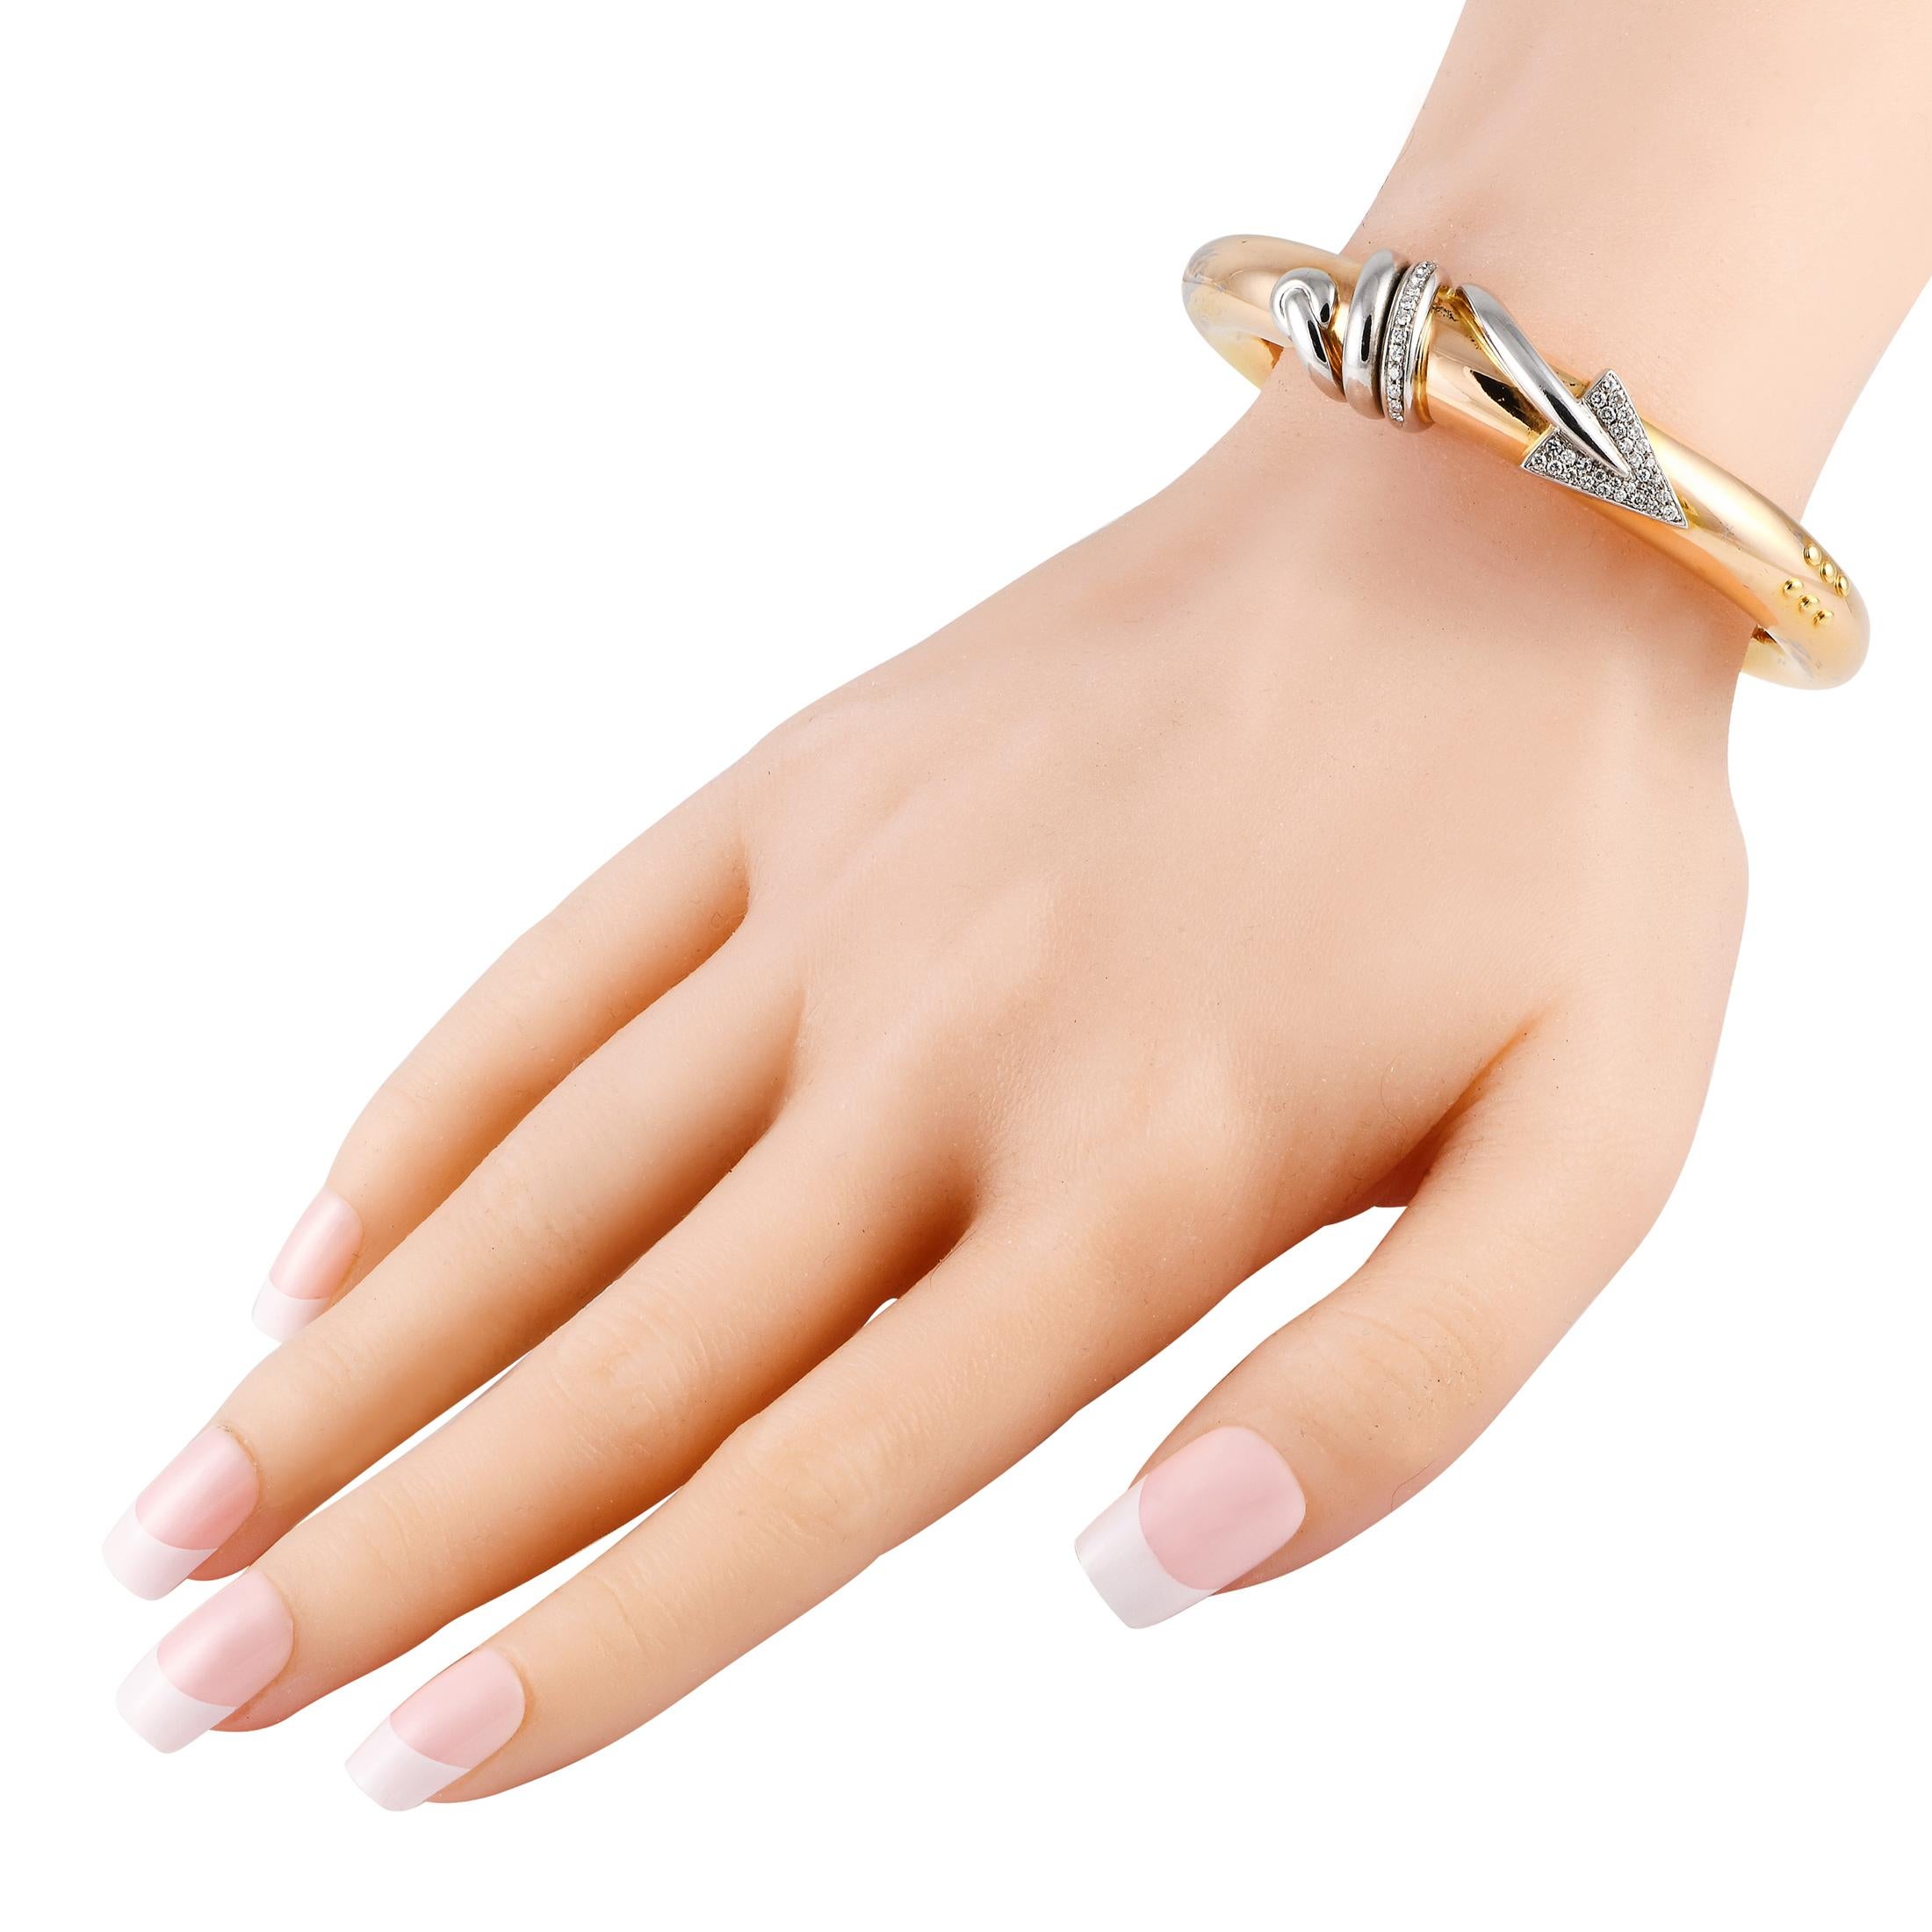 This bi-colored bracelet is anything but ordinary. Expertly made by Italian jewelry brand La Nouvelle Bague, this piece of jewelry features a rigid bracelet in solid 18K yellow gold. A white gold arrow with diamond embellishment coils itself into